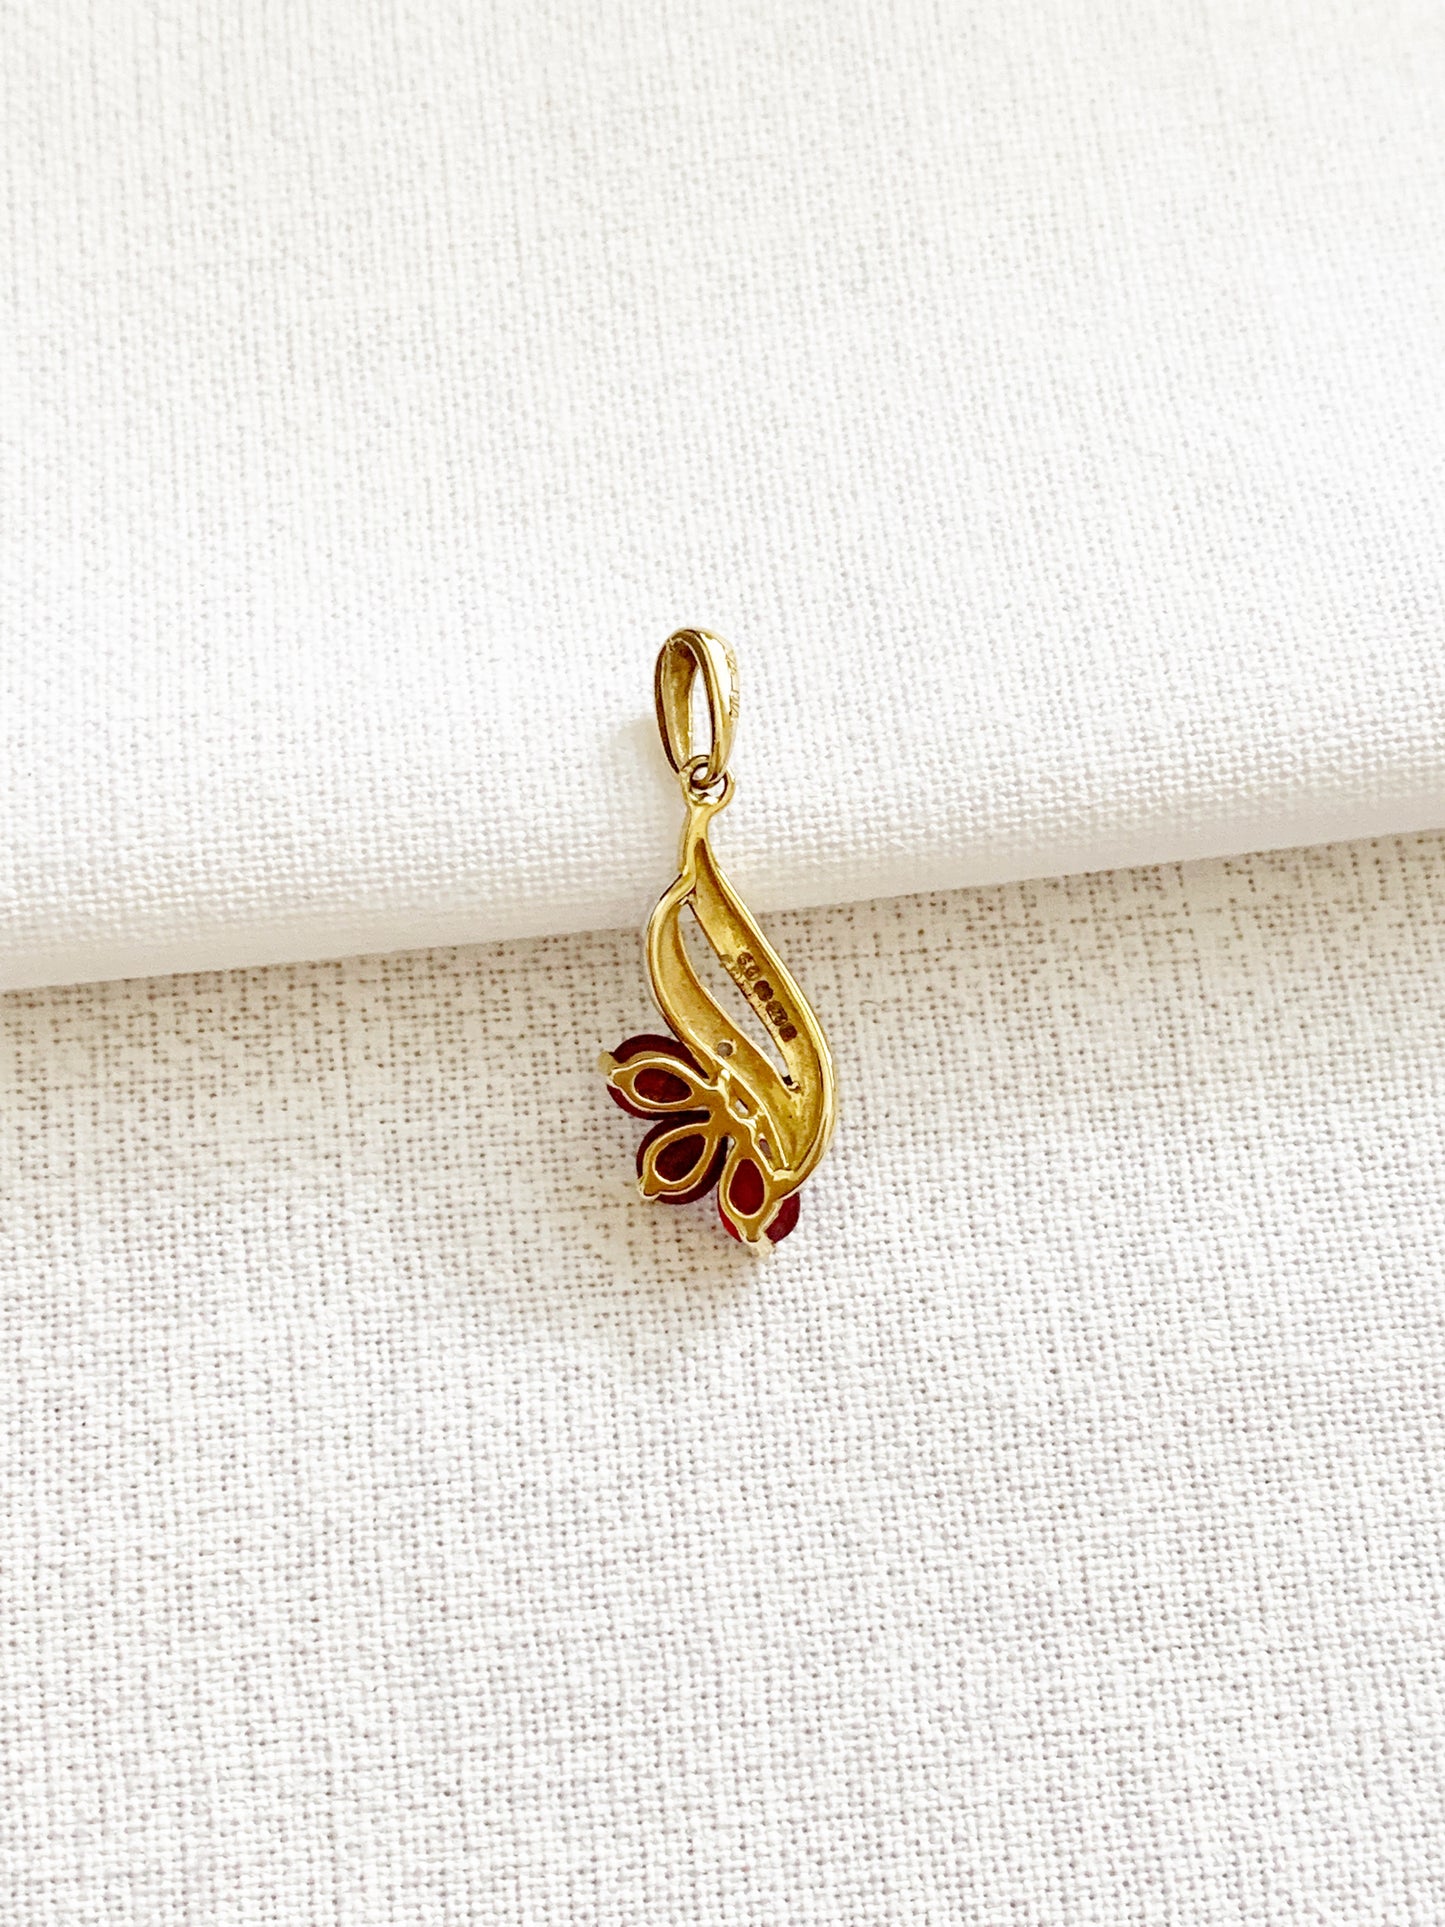 Vintage 9ct Gold Ruby and Diamond Pendant